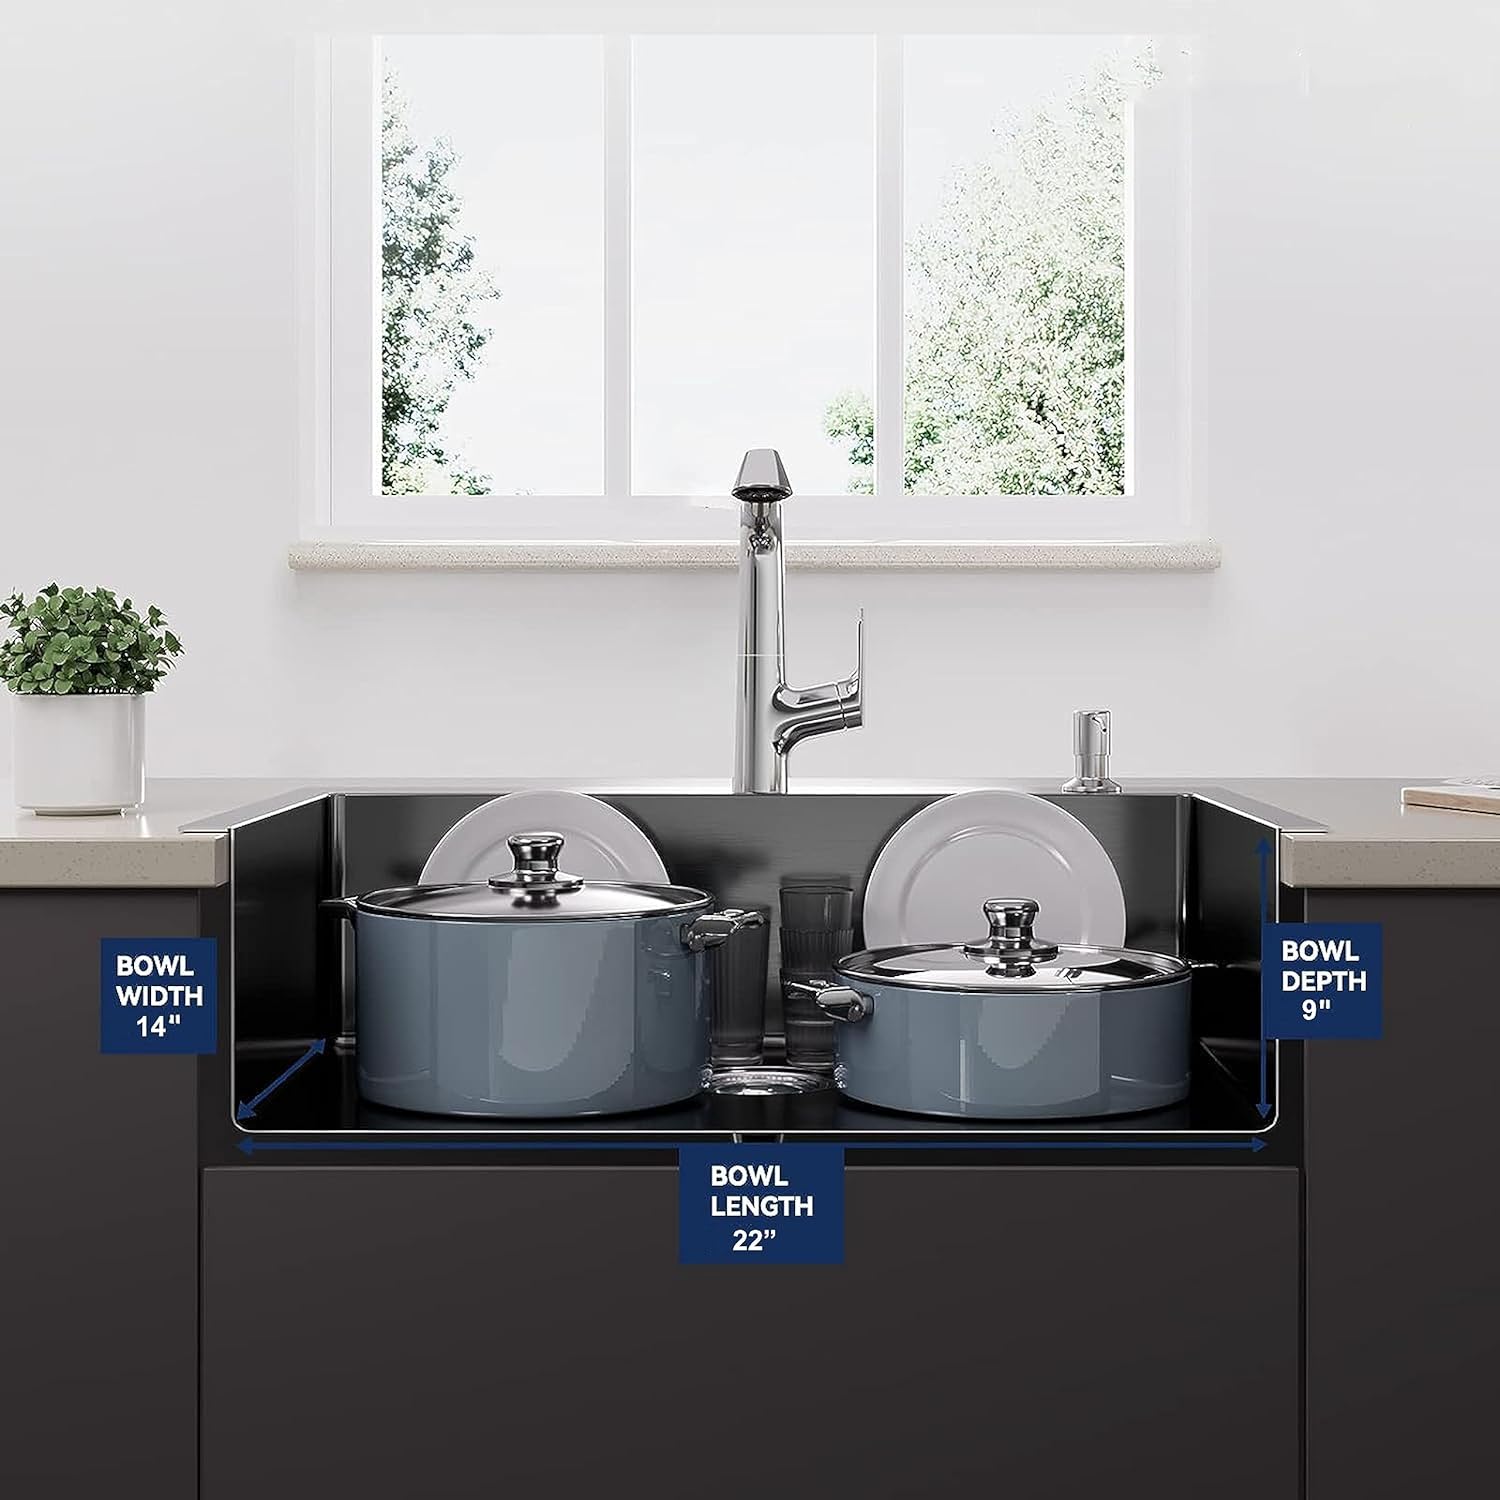 Fossa Black Kitchen Sink - 24"x18"x10" Stainless Steel Single Bowl Sink With Tap Hole ,Drain Basket, Soap Dispenser, Siphon Drain - Topmount Sink for Campervan or Home Kitchen Fossa Home